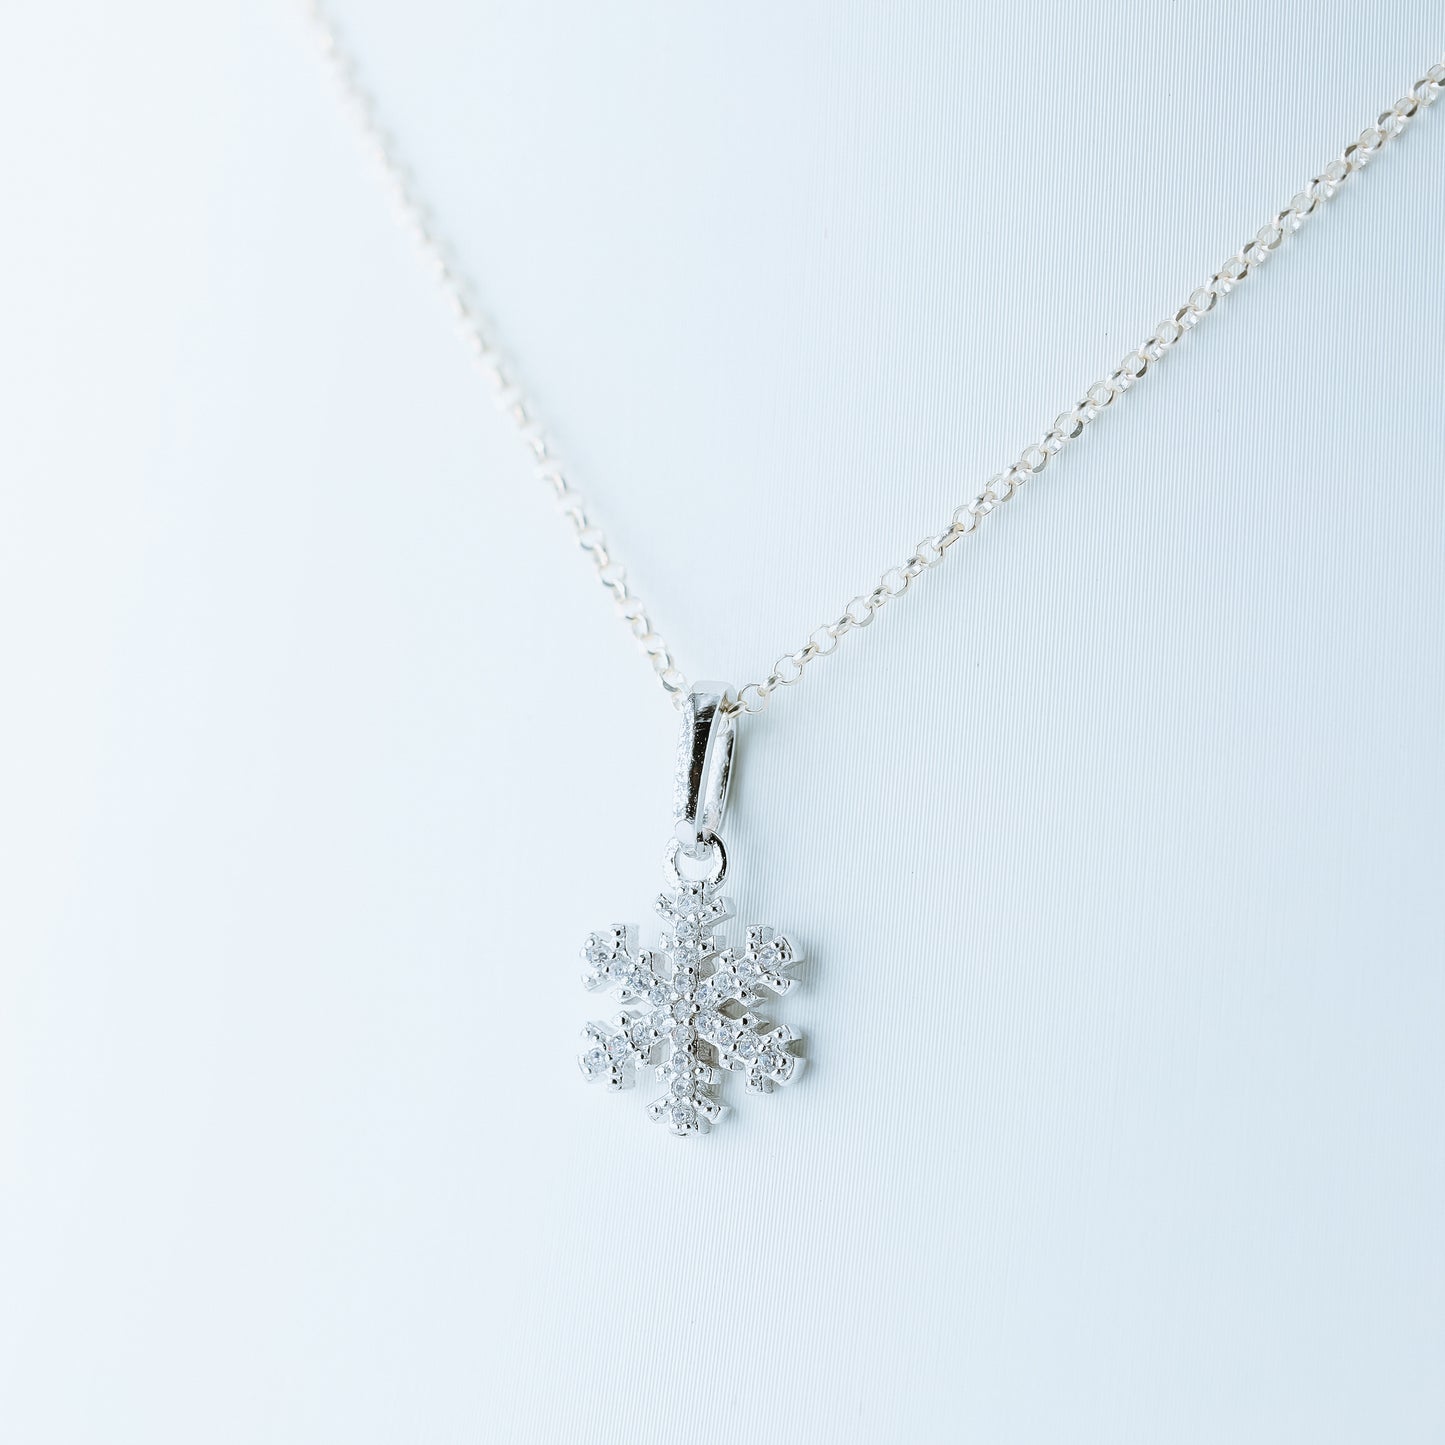 Silver Snowflake Necklace • Dainty Snowflake • Winter Necklace • Snow Necklace • Minimalist Cute Holiday Jewelry for Her • BYSDMJEWELS